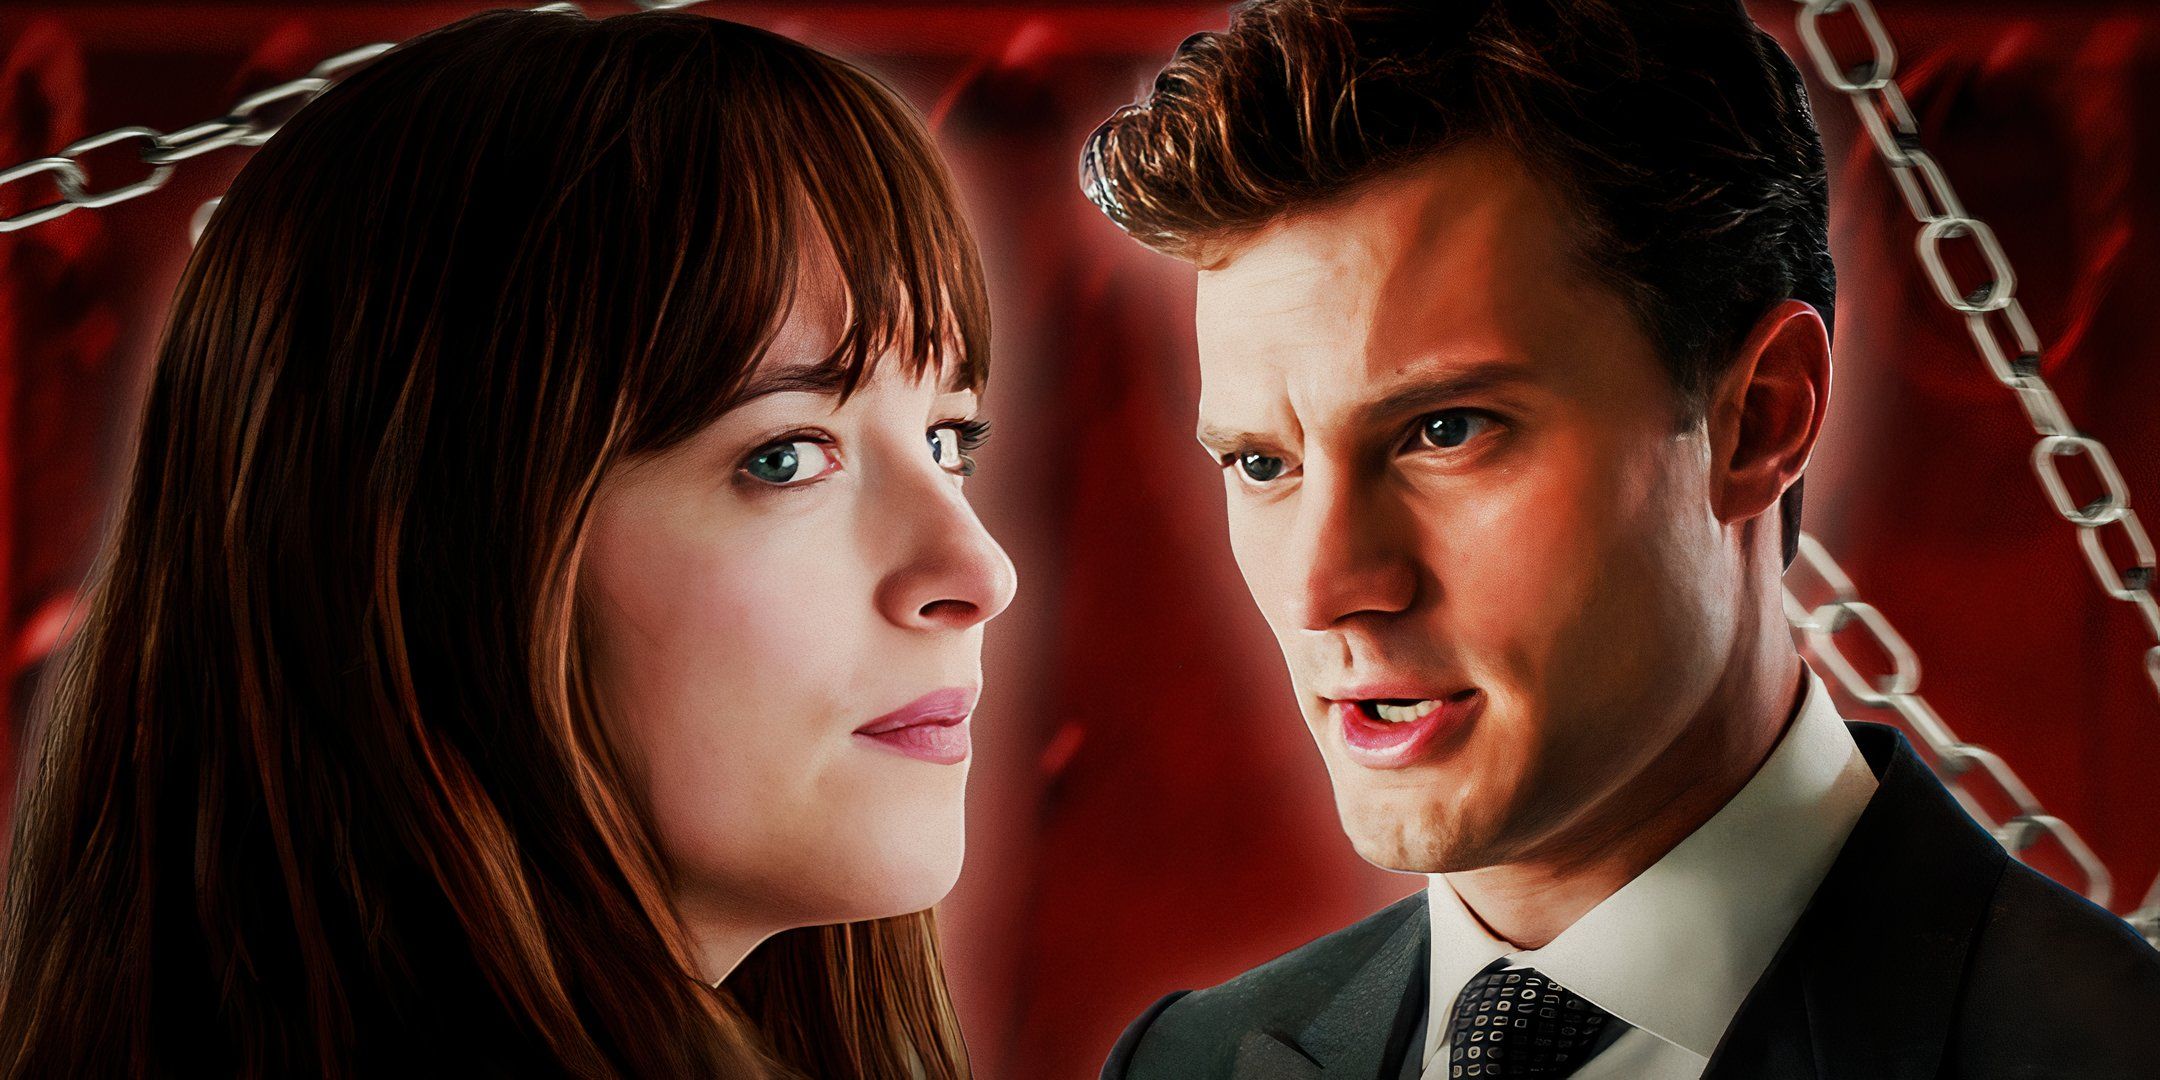 Ana and Christian from Fifty Shades of Grey are in front of chains.